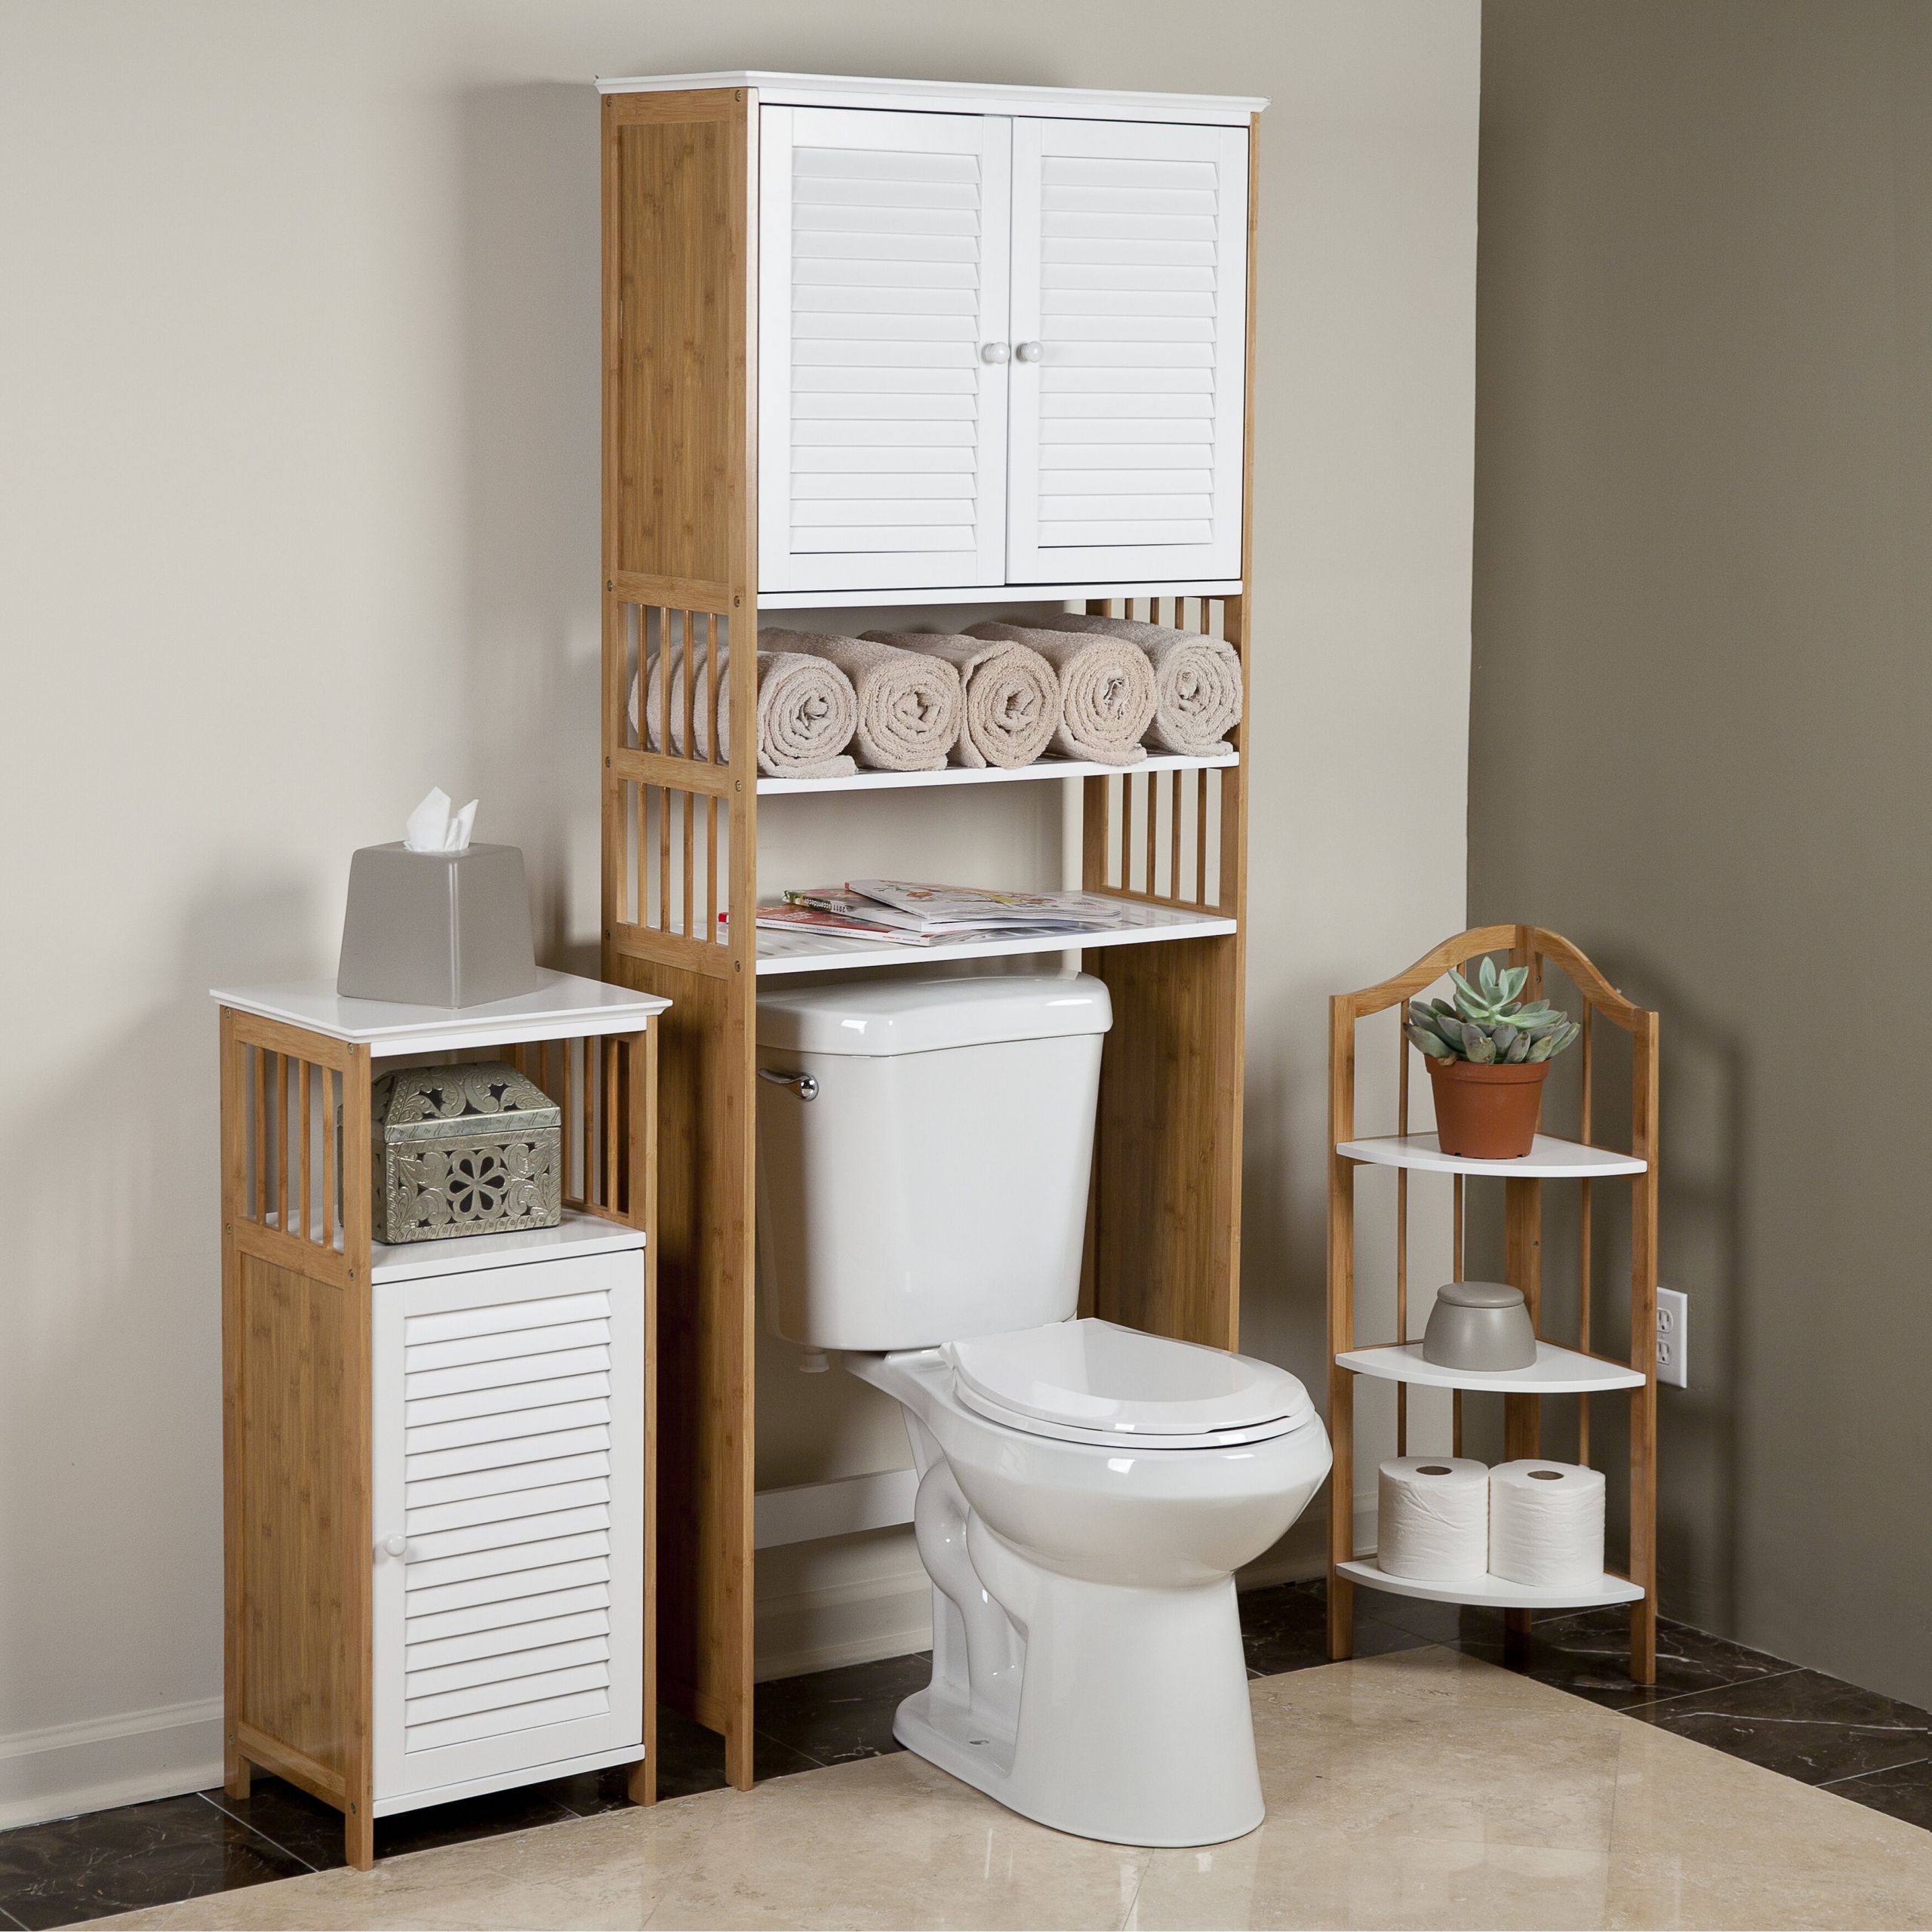 Over The Bathroom Storage
 DanyaB Bamboo Bathroom 27" x 71" Free Standing Over the